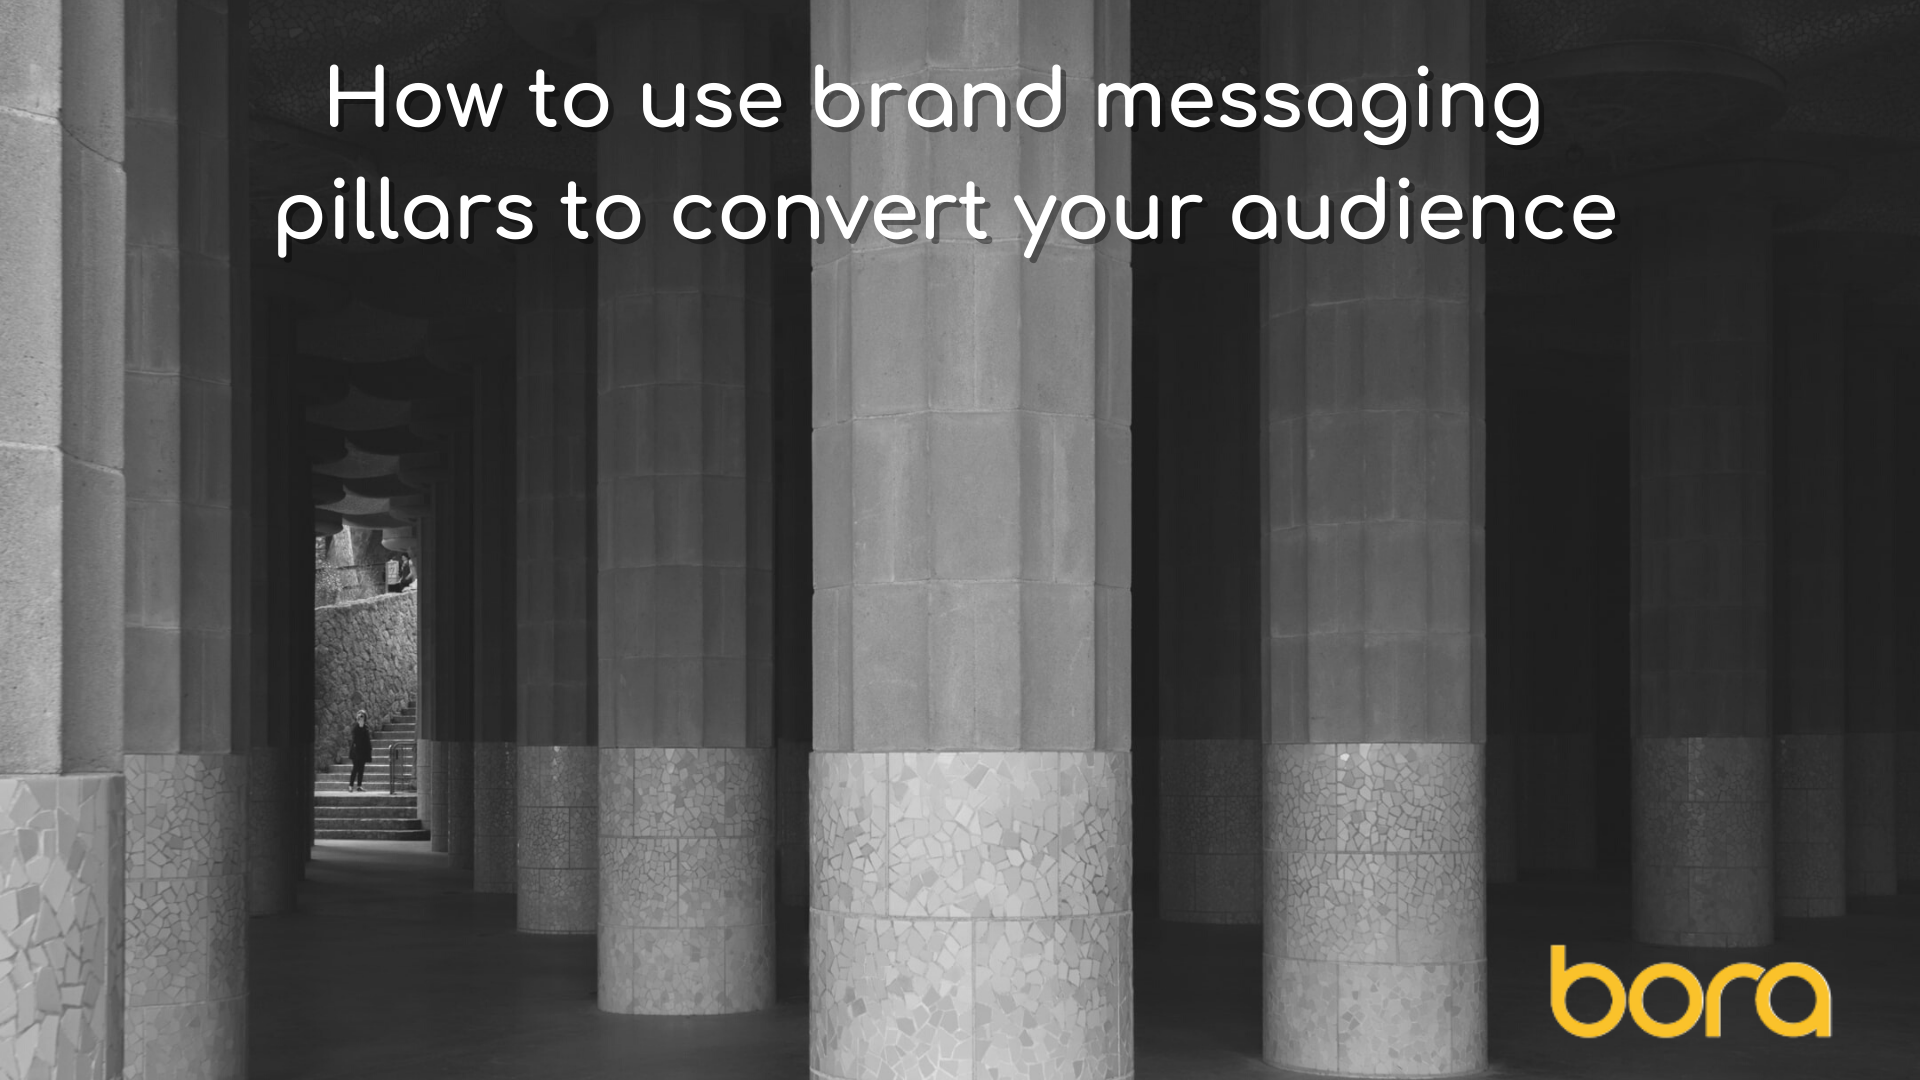 How to use brand messaging pillars to convert your audience